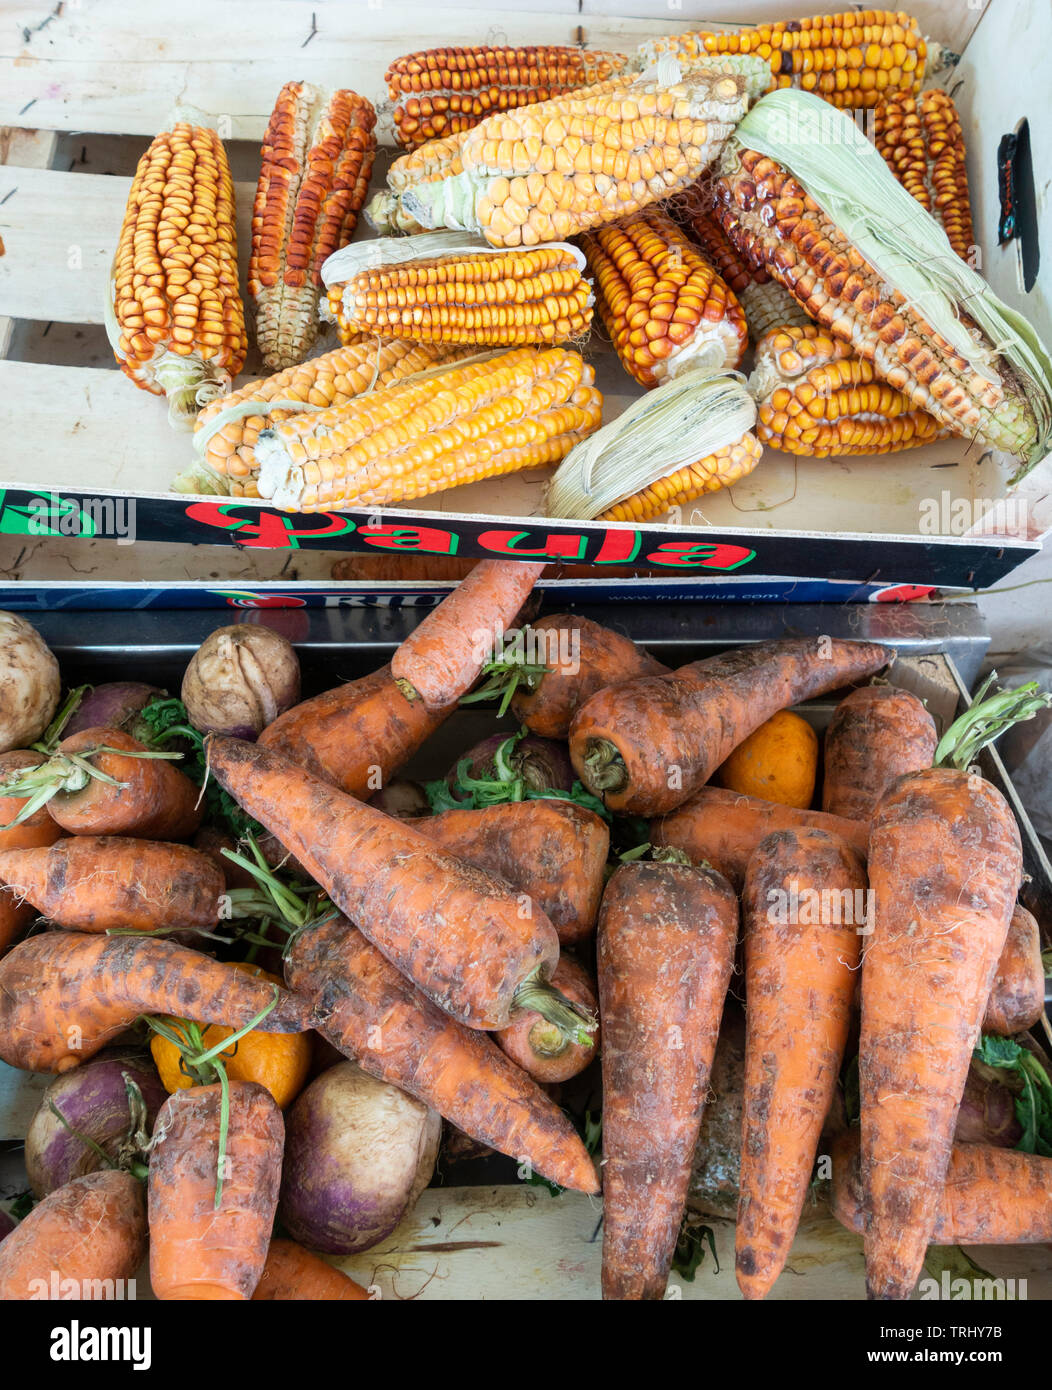 Reduced price loose Carrots and veg on market stall in Spain. Stock Photo